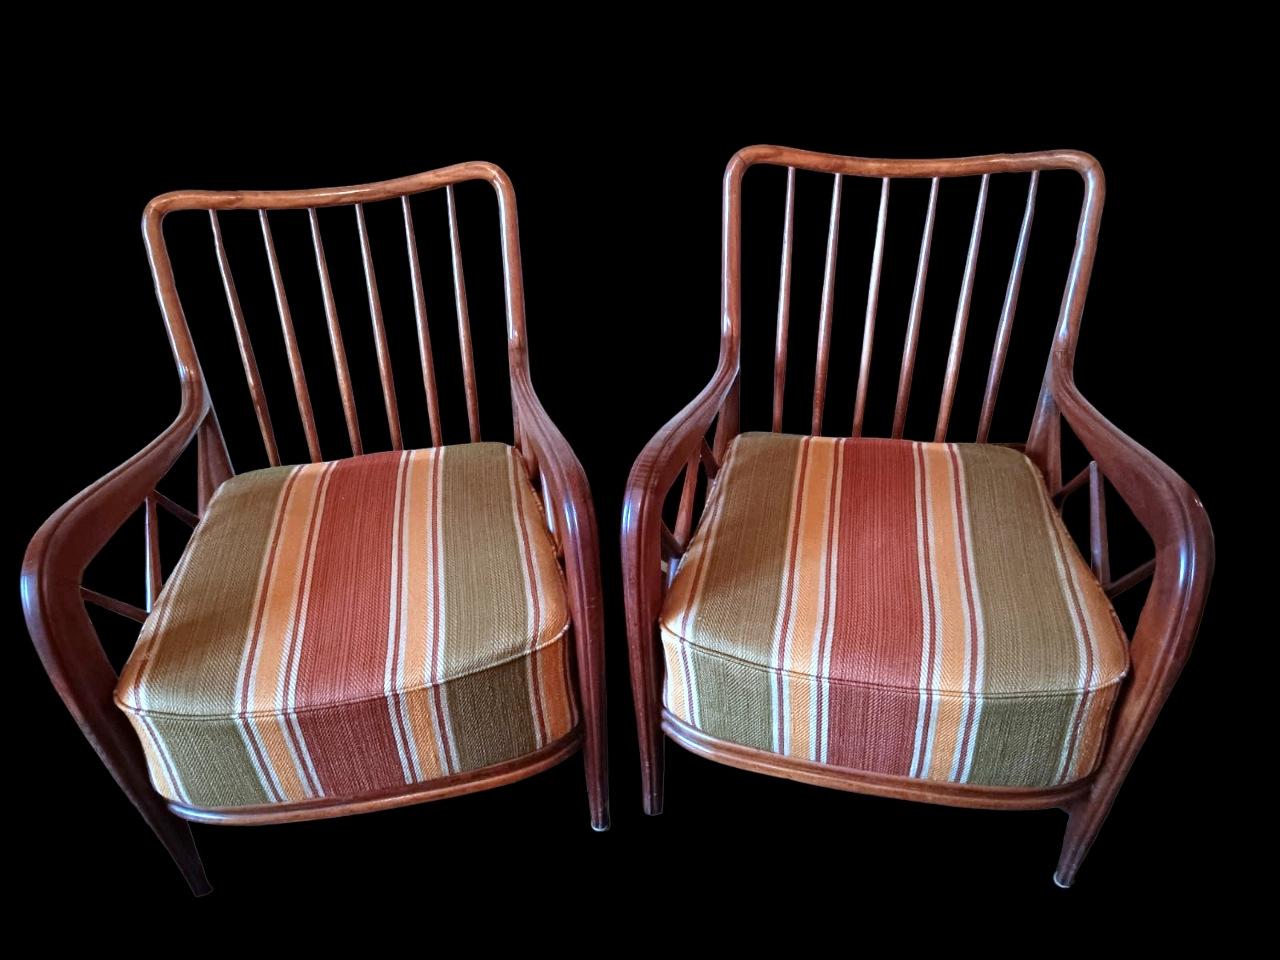 Hand-Crafted Paolo Buffa Design Pair Of Italian Wooden Armchairs Upholstered Fabric Cushions